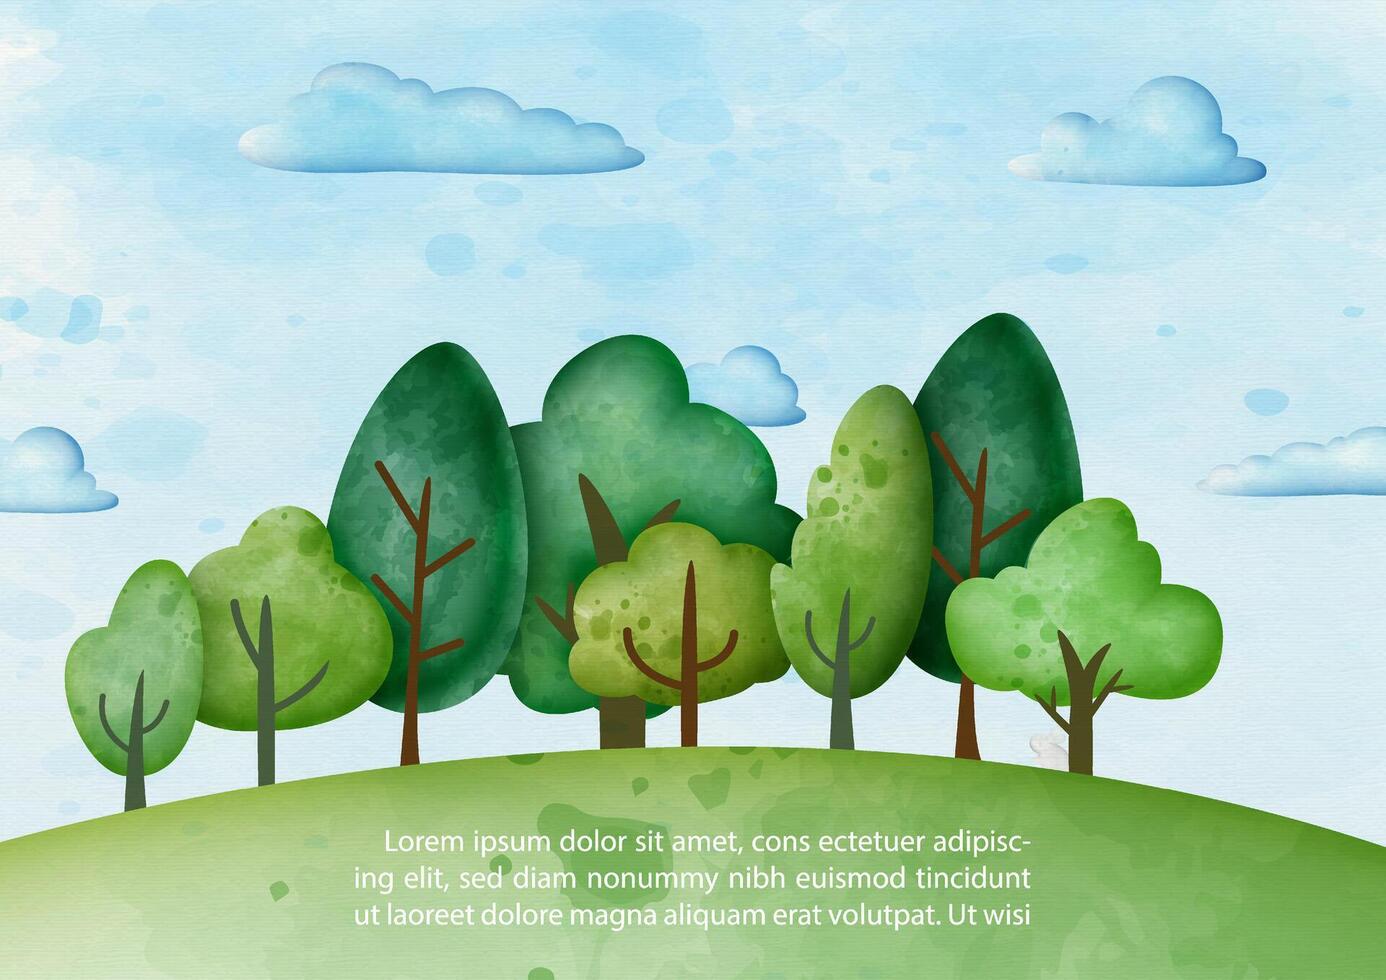 Trees and small forest with example texts on blue sky background. Poster campaign of world environment day in watercolors style and vector design.